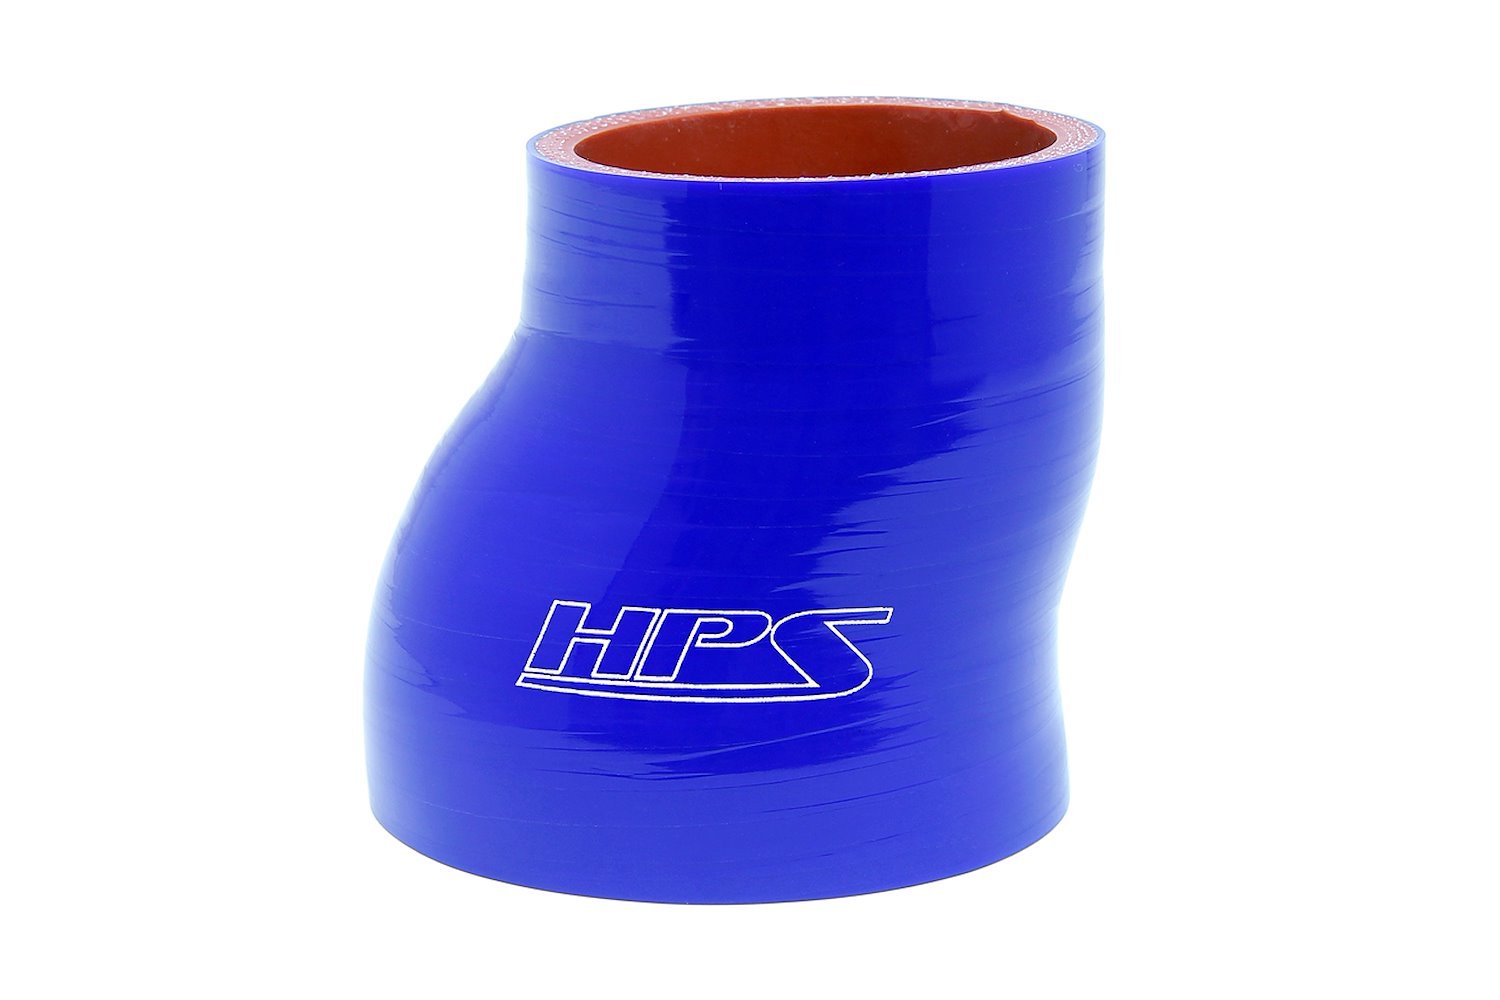 HTSOR-200-225-BLUE Silicone Offset Reducer Hose, High-Temp Reinforced, 2 in. - 2-1/4 in. ID, 3 in. Long, Blue